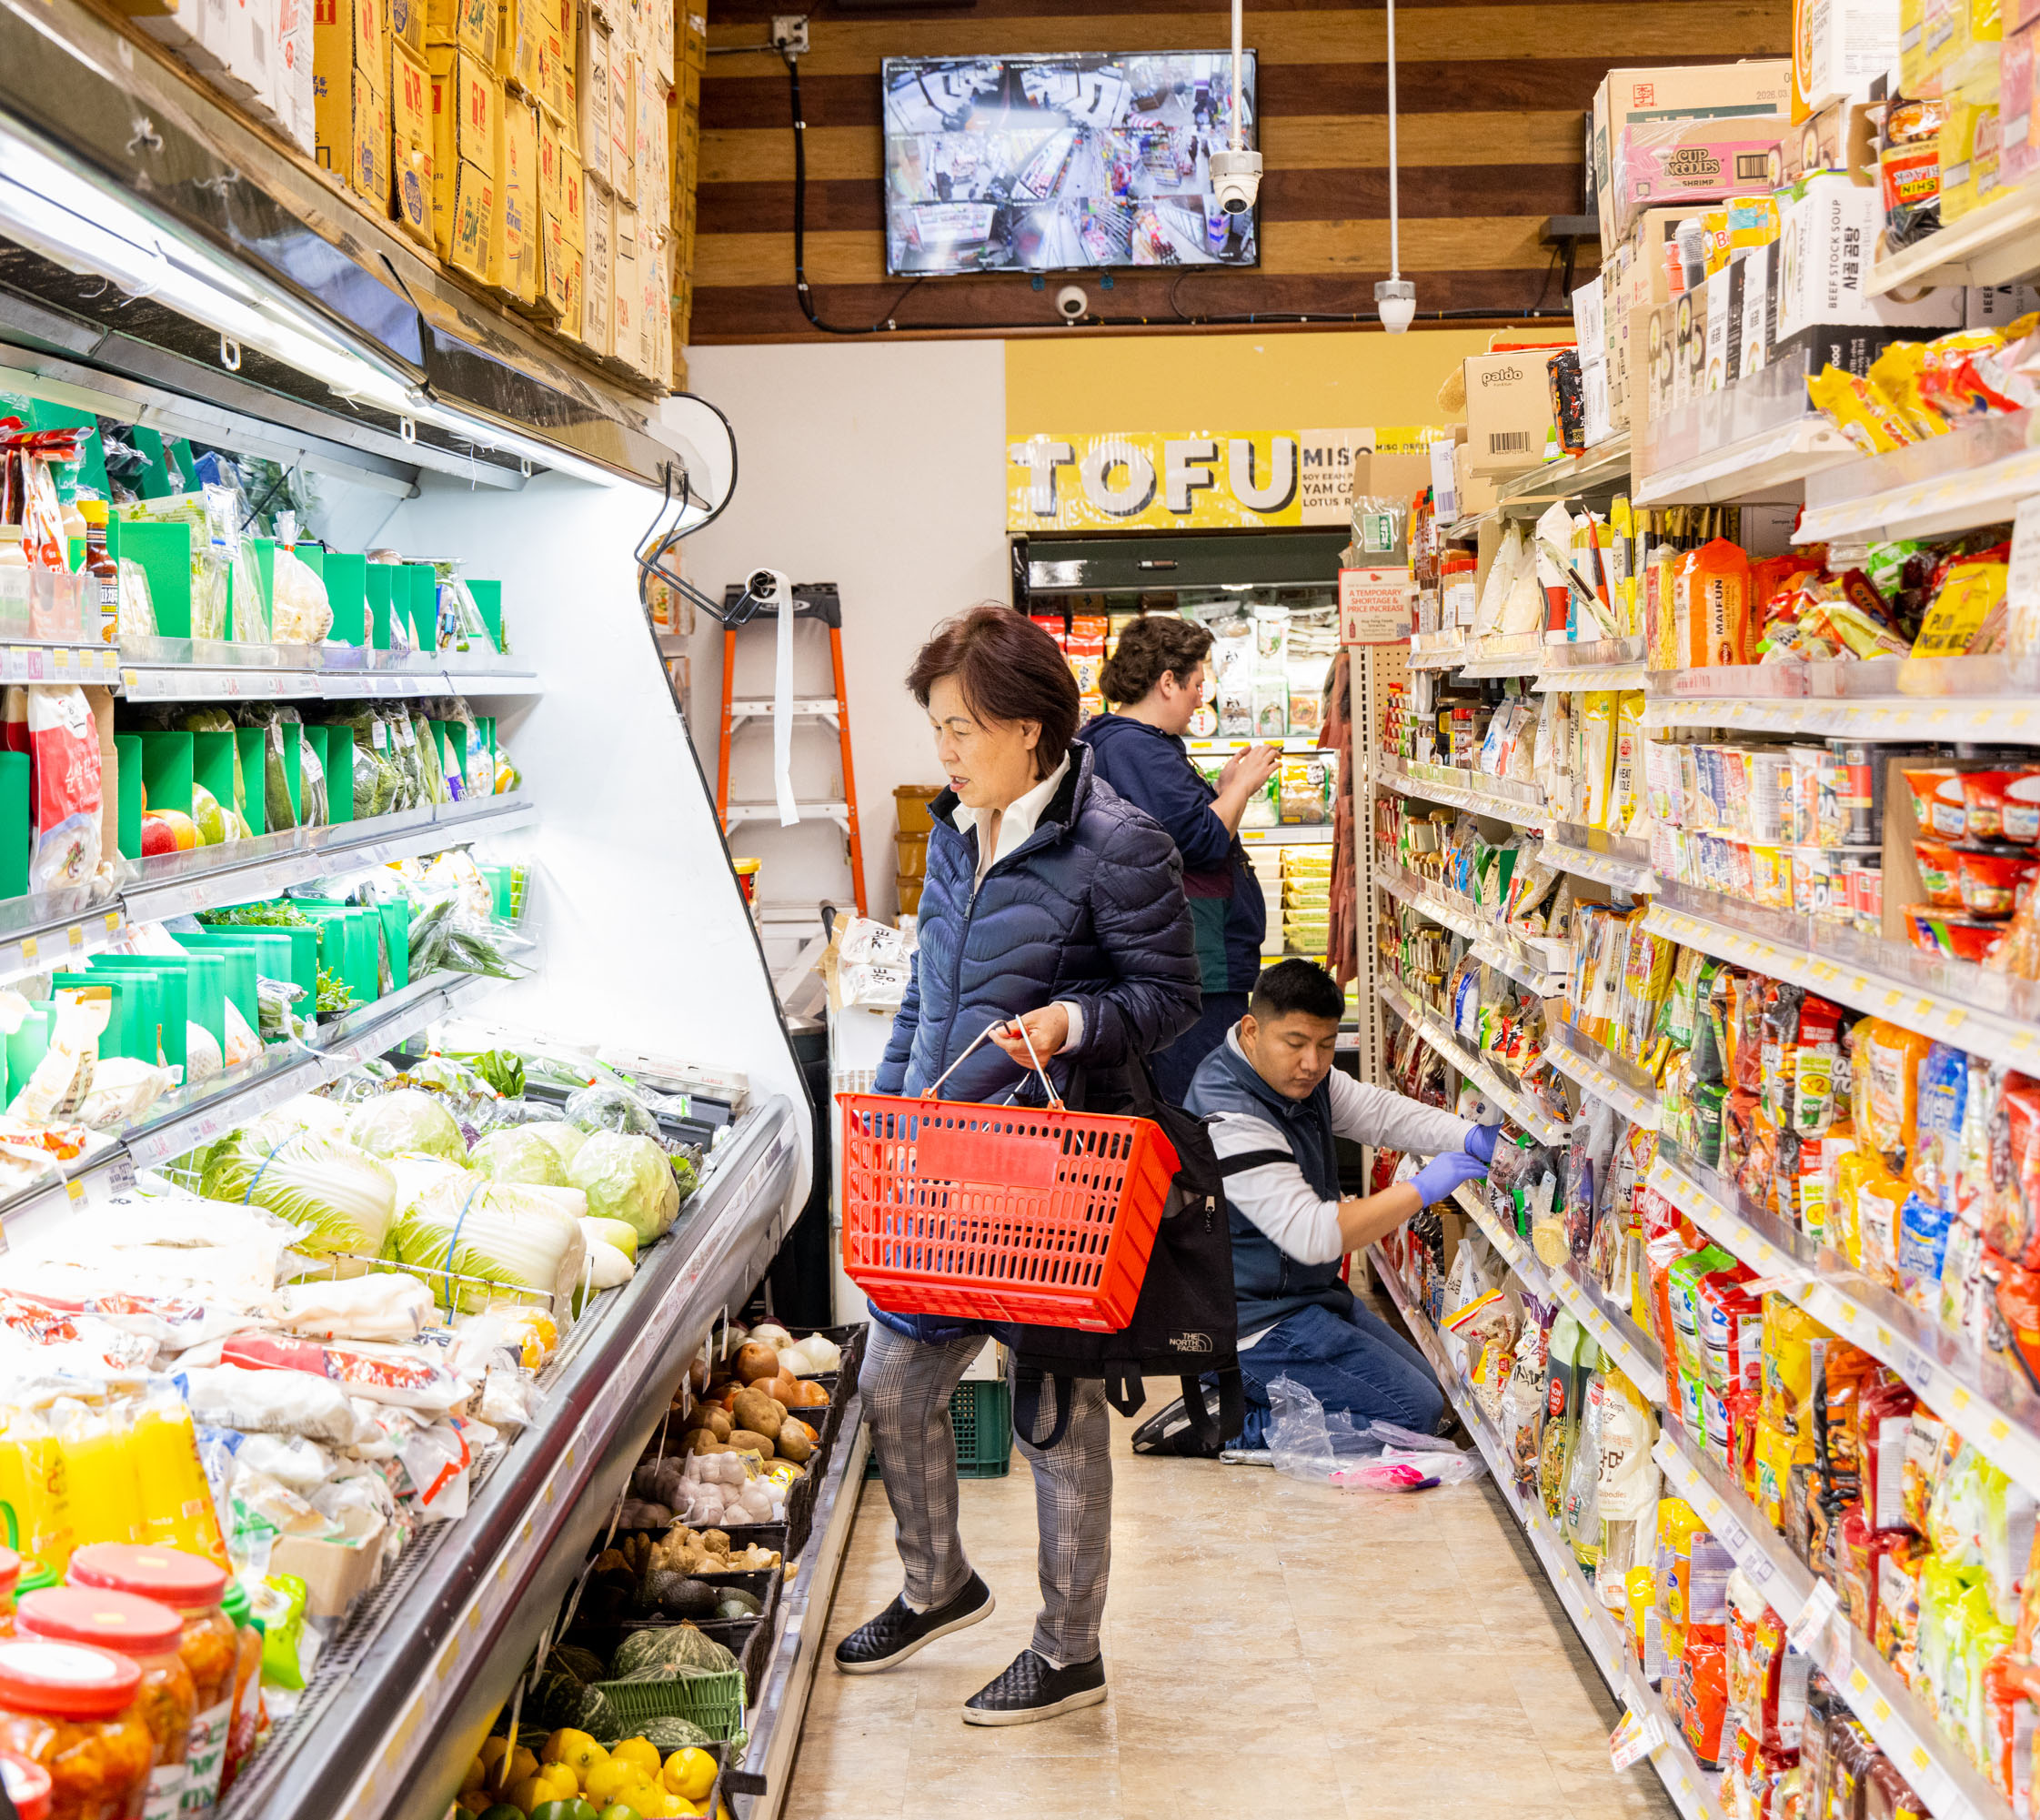 A woman with a red basket shops in a grocery aisle. Items are neatly stocked on both sides, and two store employees are organizing products on the right.